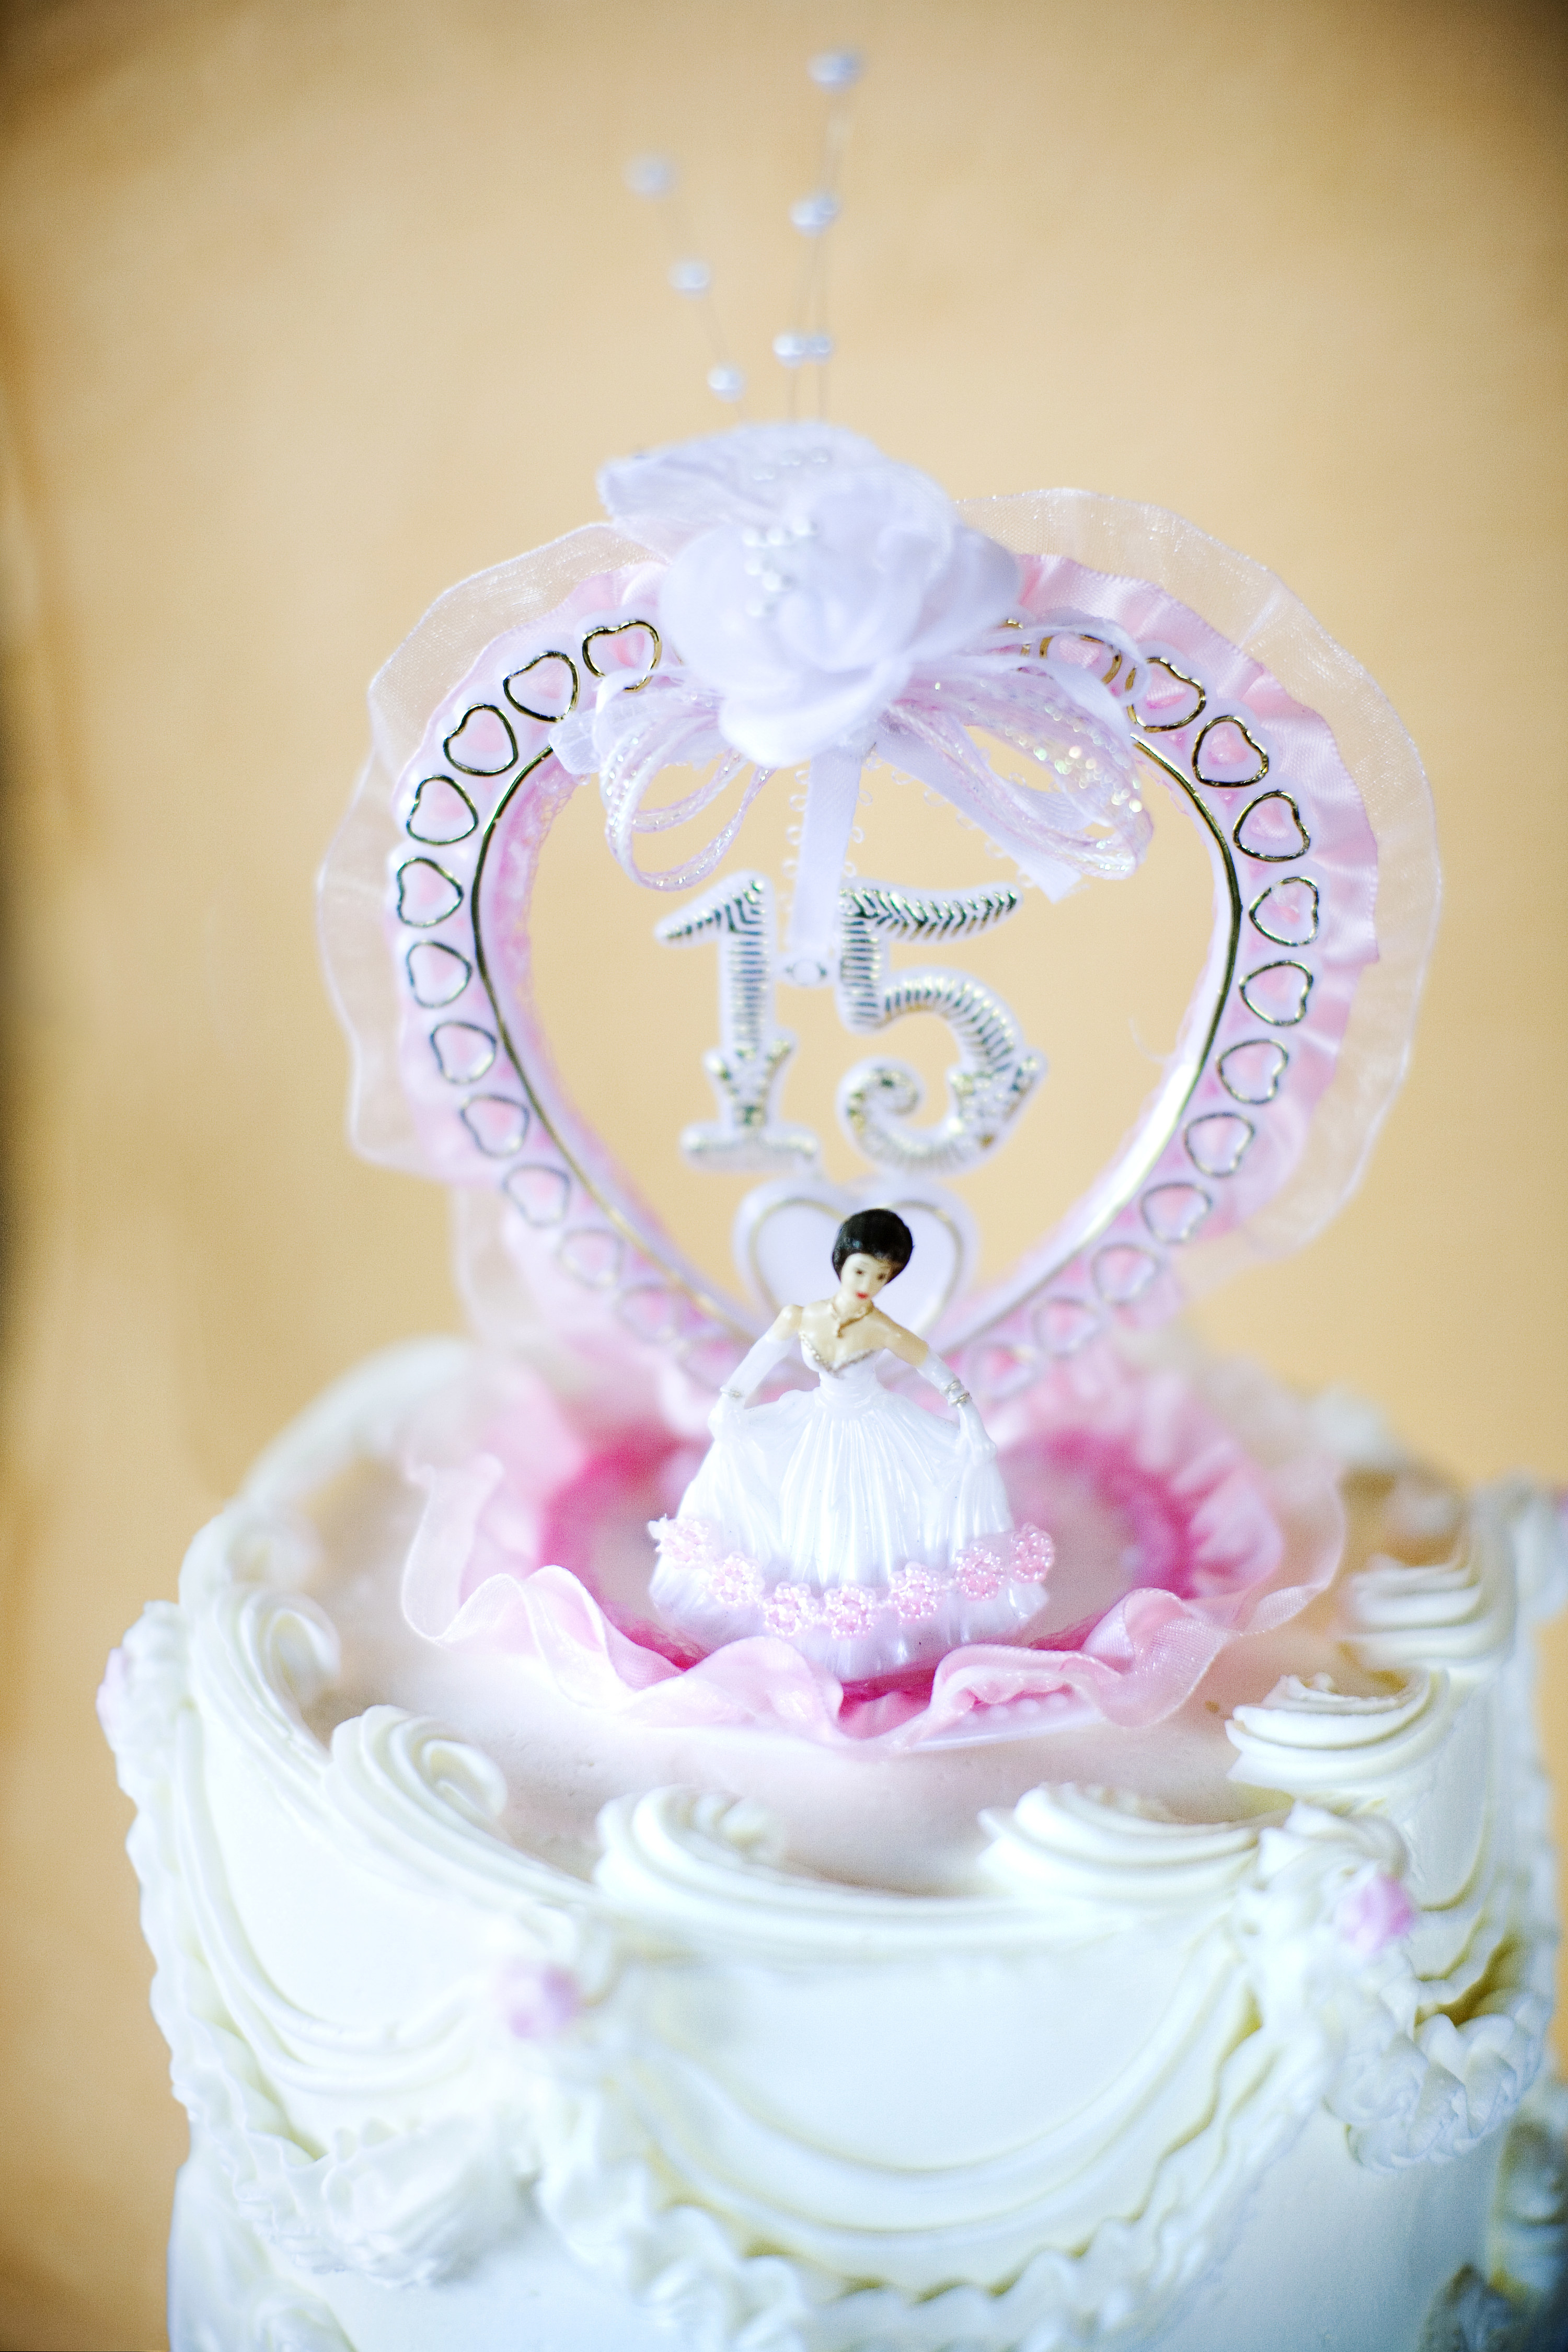 A cake decorated with a figure in a gown and the number 15